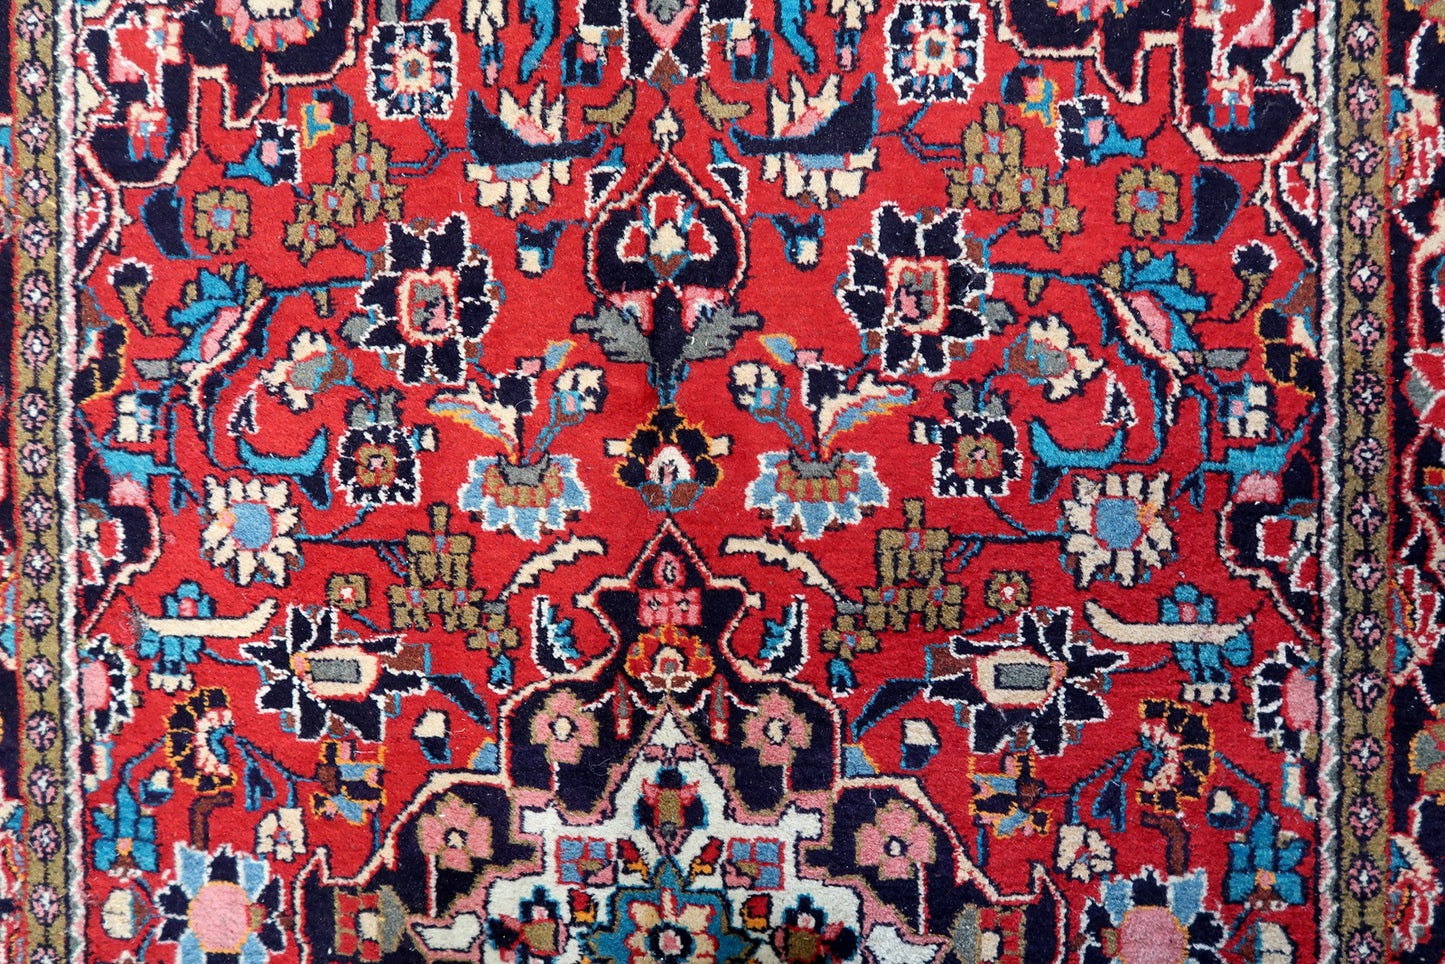 Detailed view of the complex patterns in the border, showcasing the harmonious blend of colors